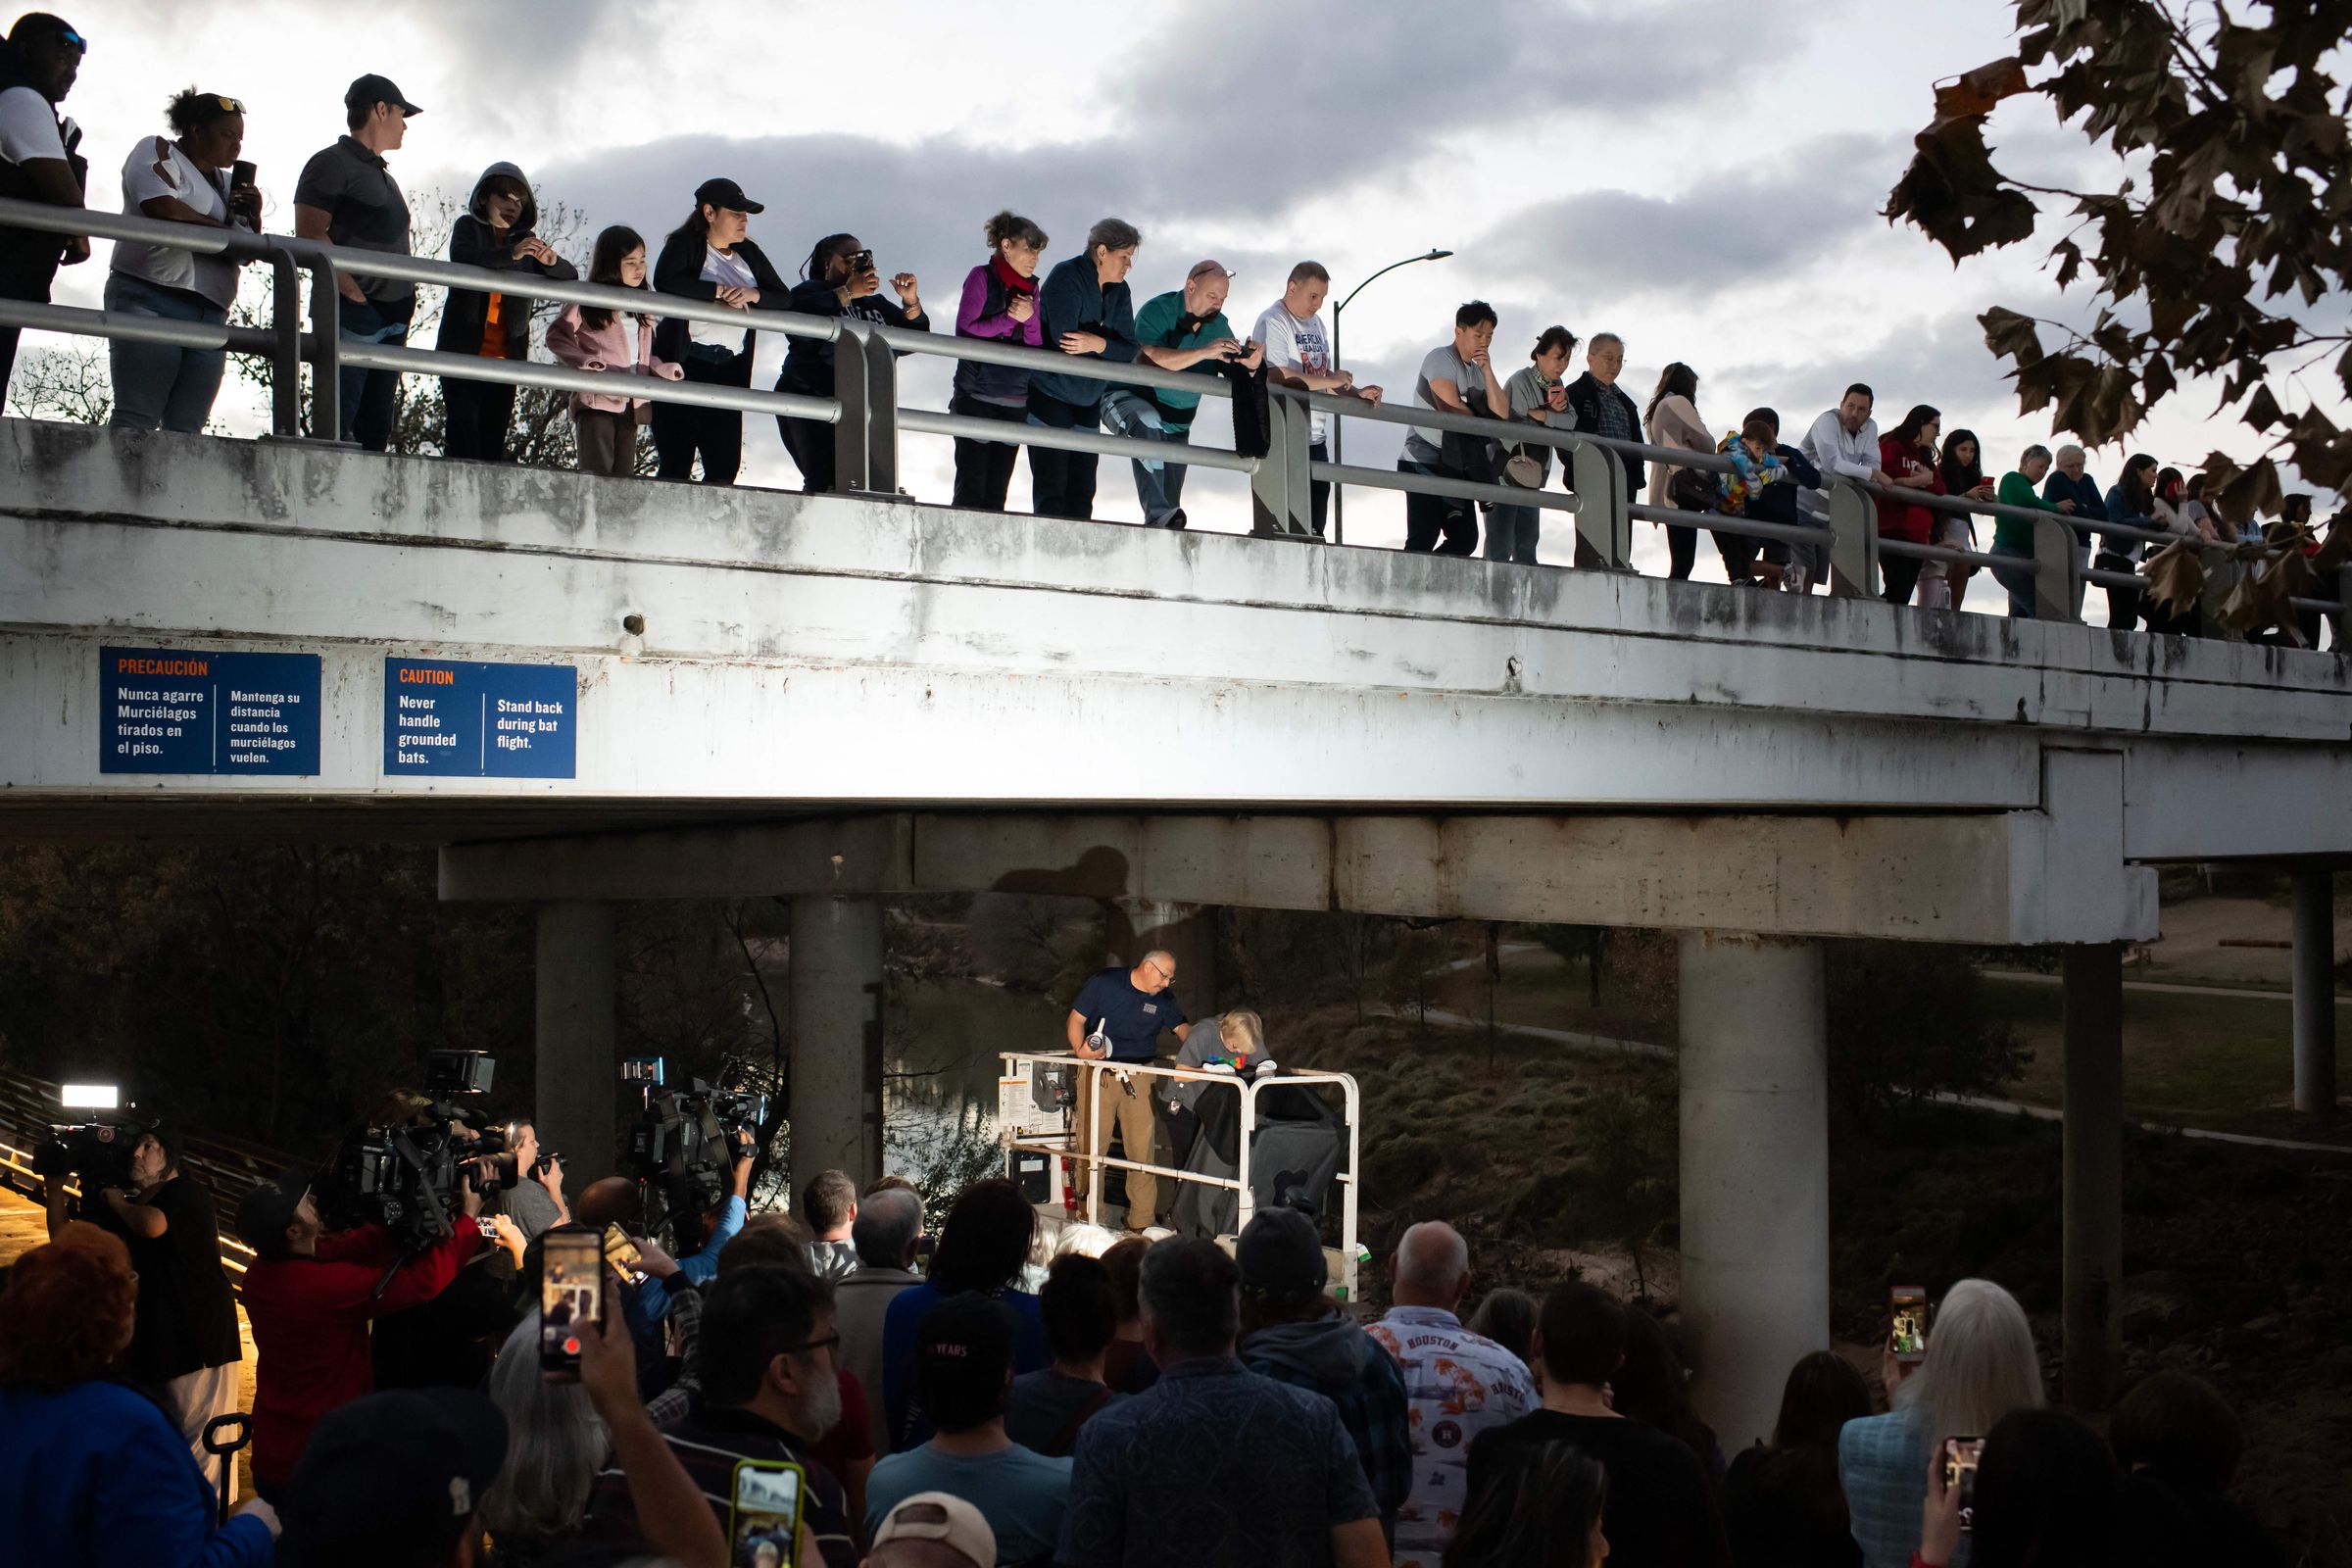 Crowds gathered atop and below a bridge.